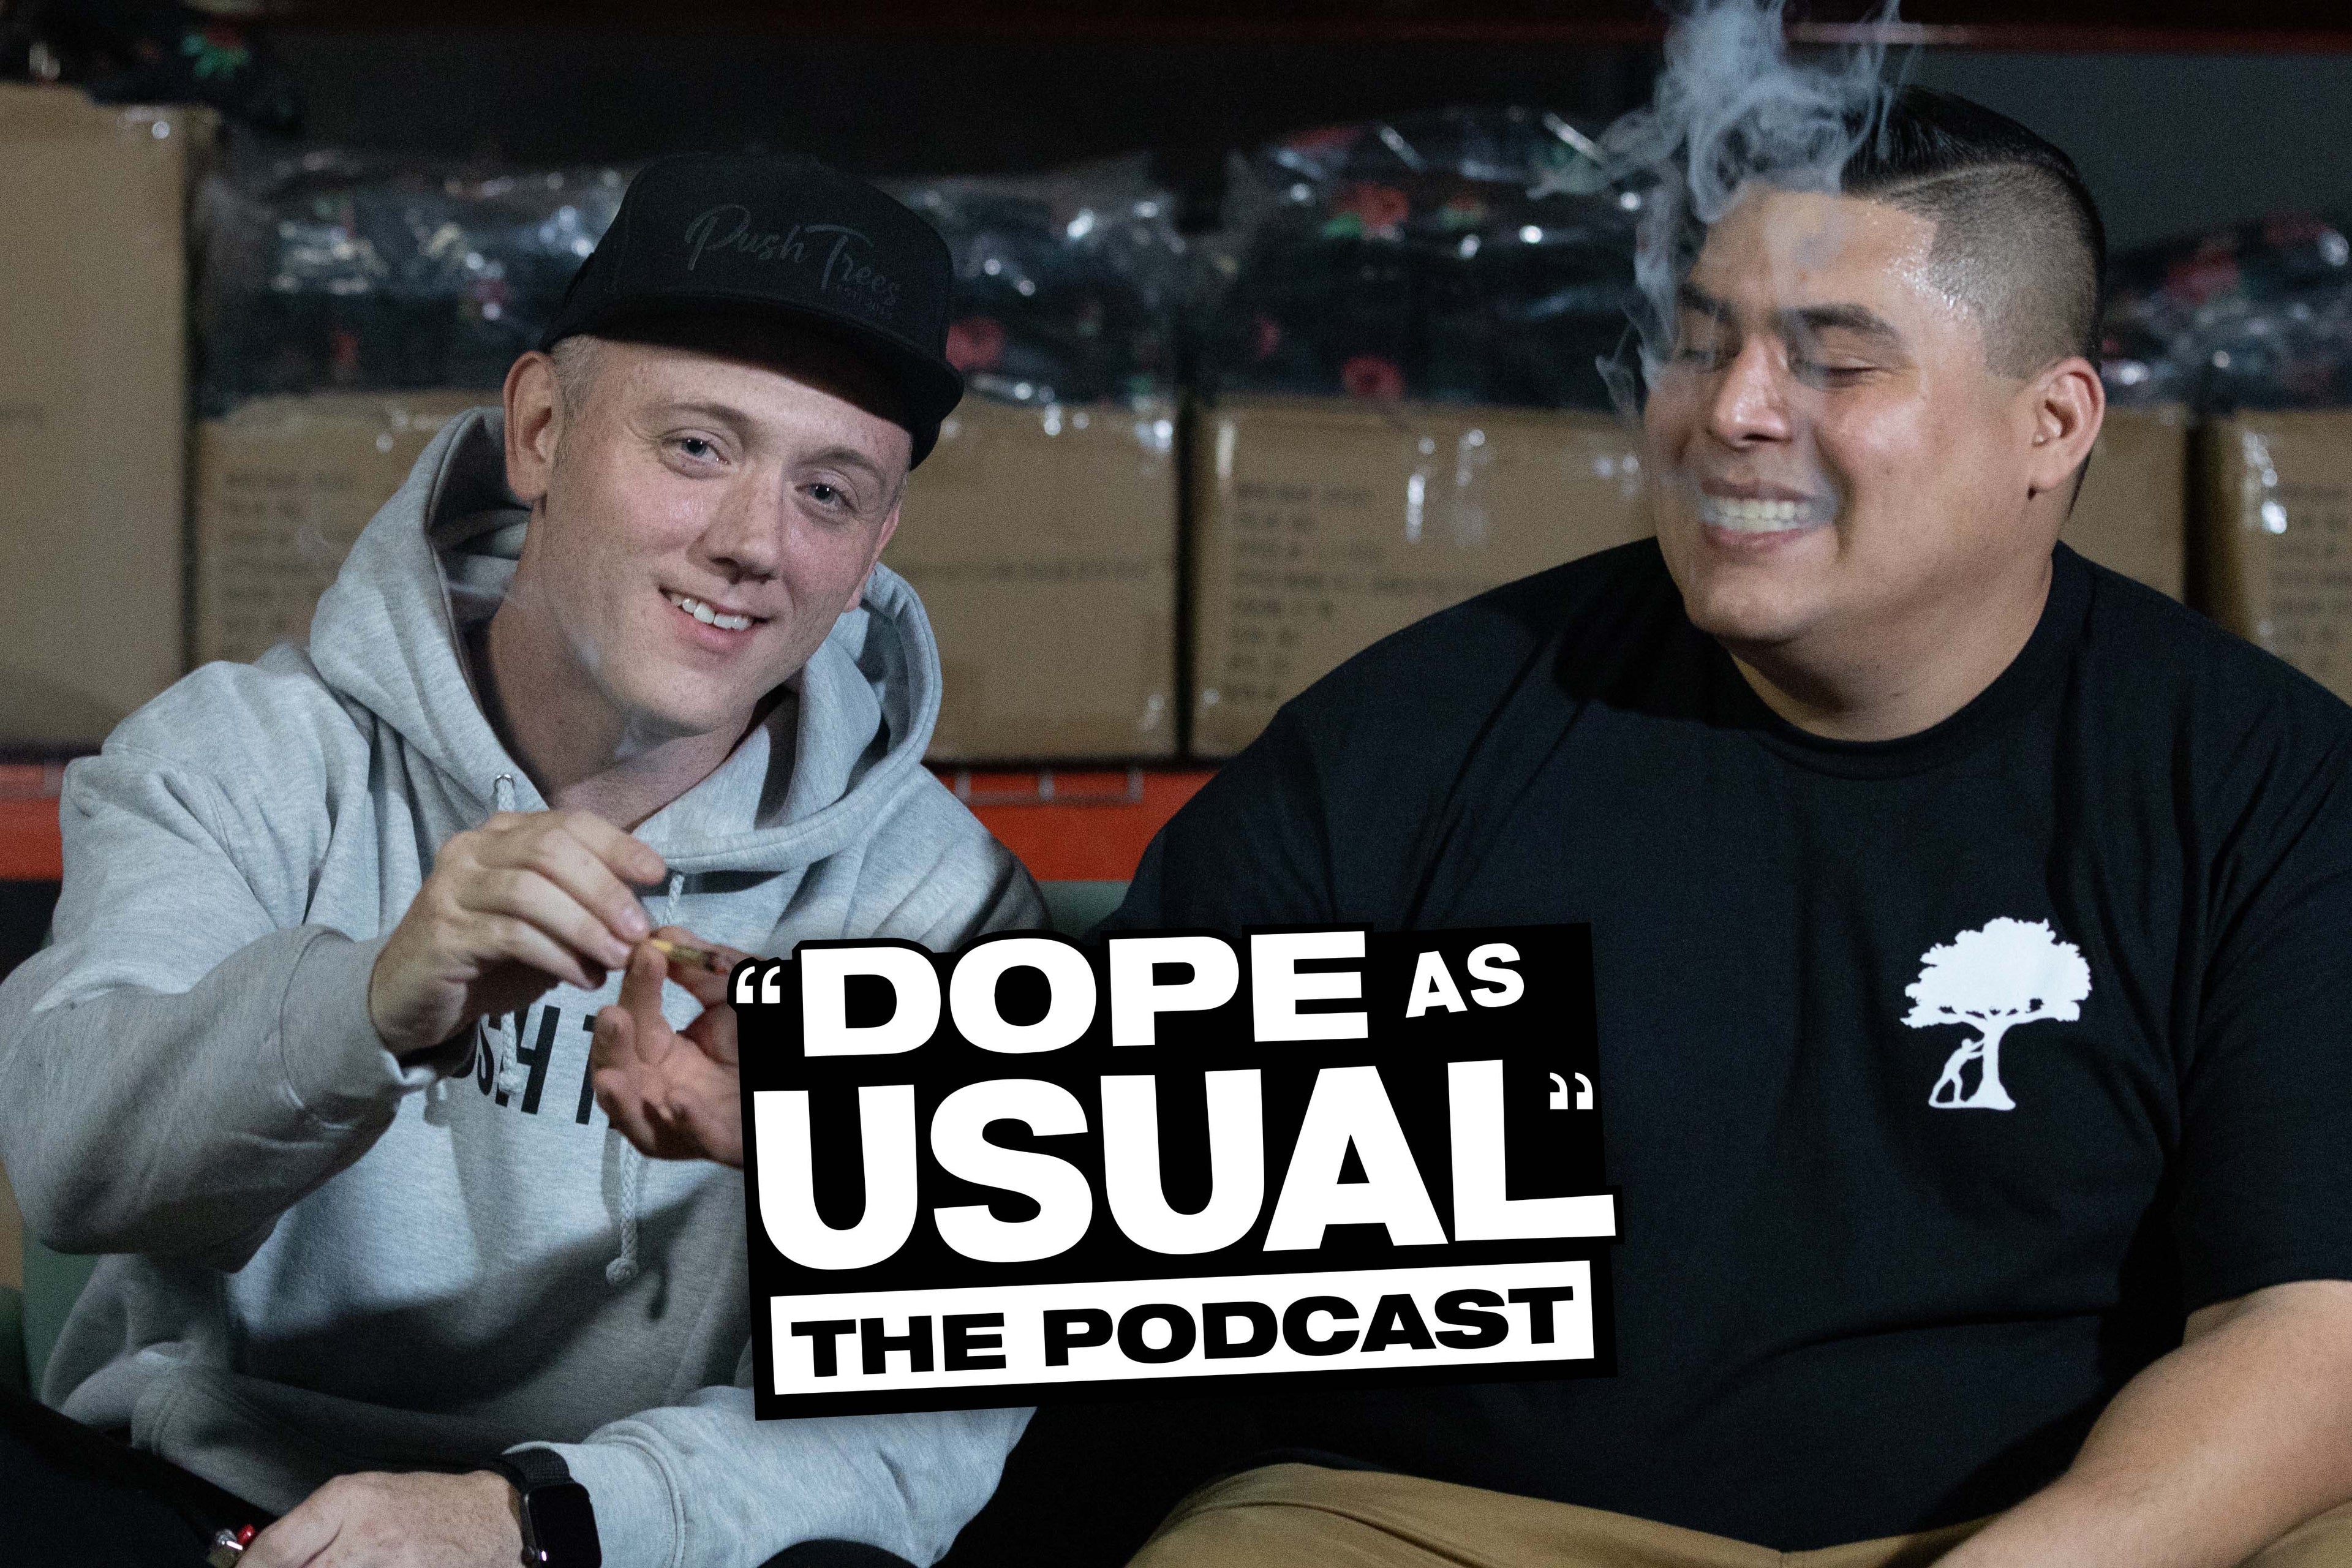 Meet The Team Behind the Chart-Topping "DOPE AS USUAL" Podcast